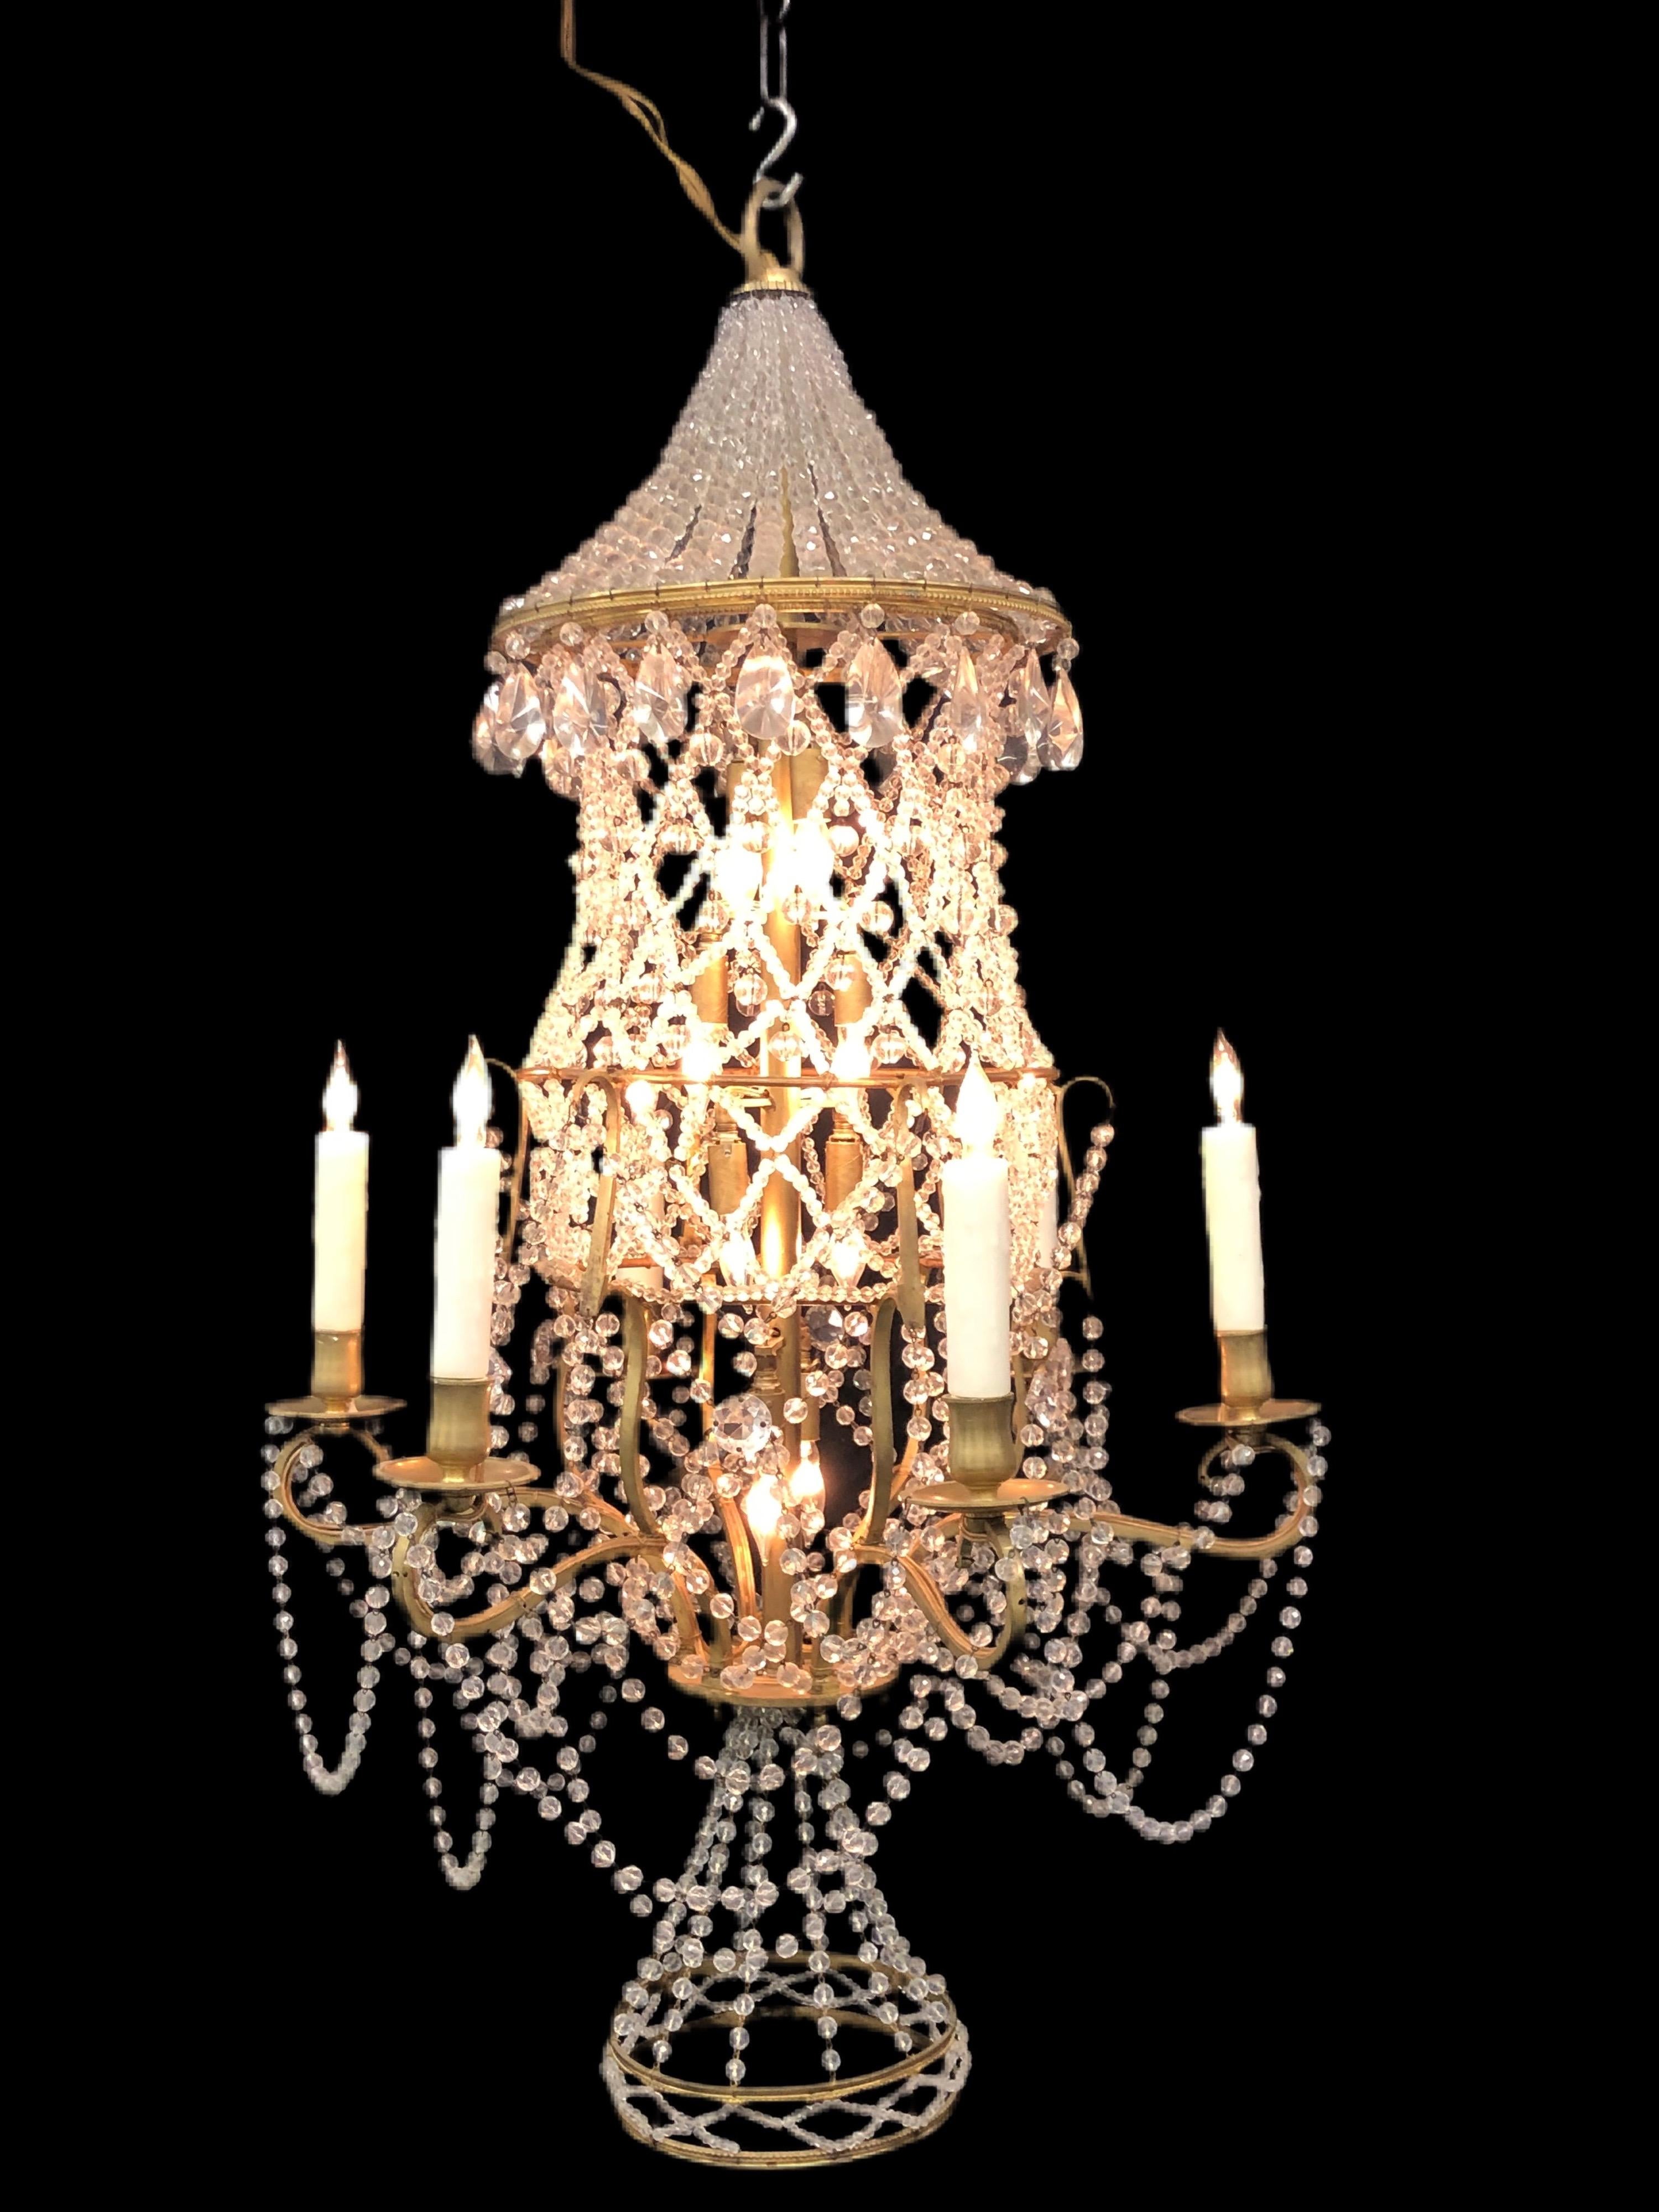 A sophisticated Italian crystal Chinoiserie pagoda chandelier in the Regency style is from the early 20th century. The bronze Pagoda frame is draped in crystal beaded chain in a diamond pattern with the top diamond patterns having crystal spheres